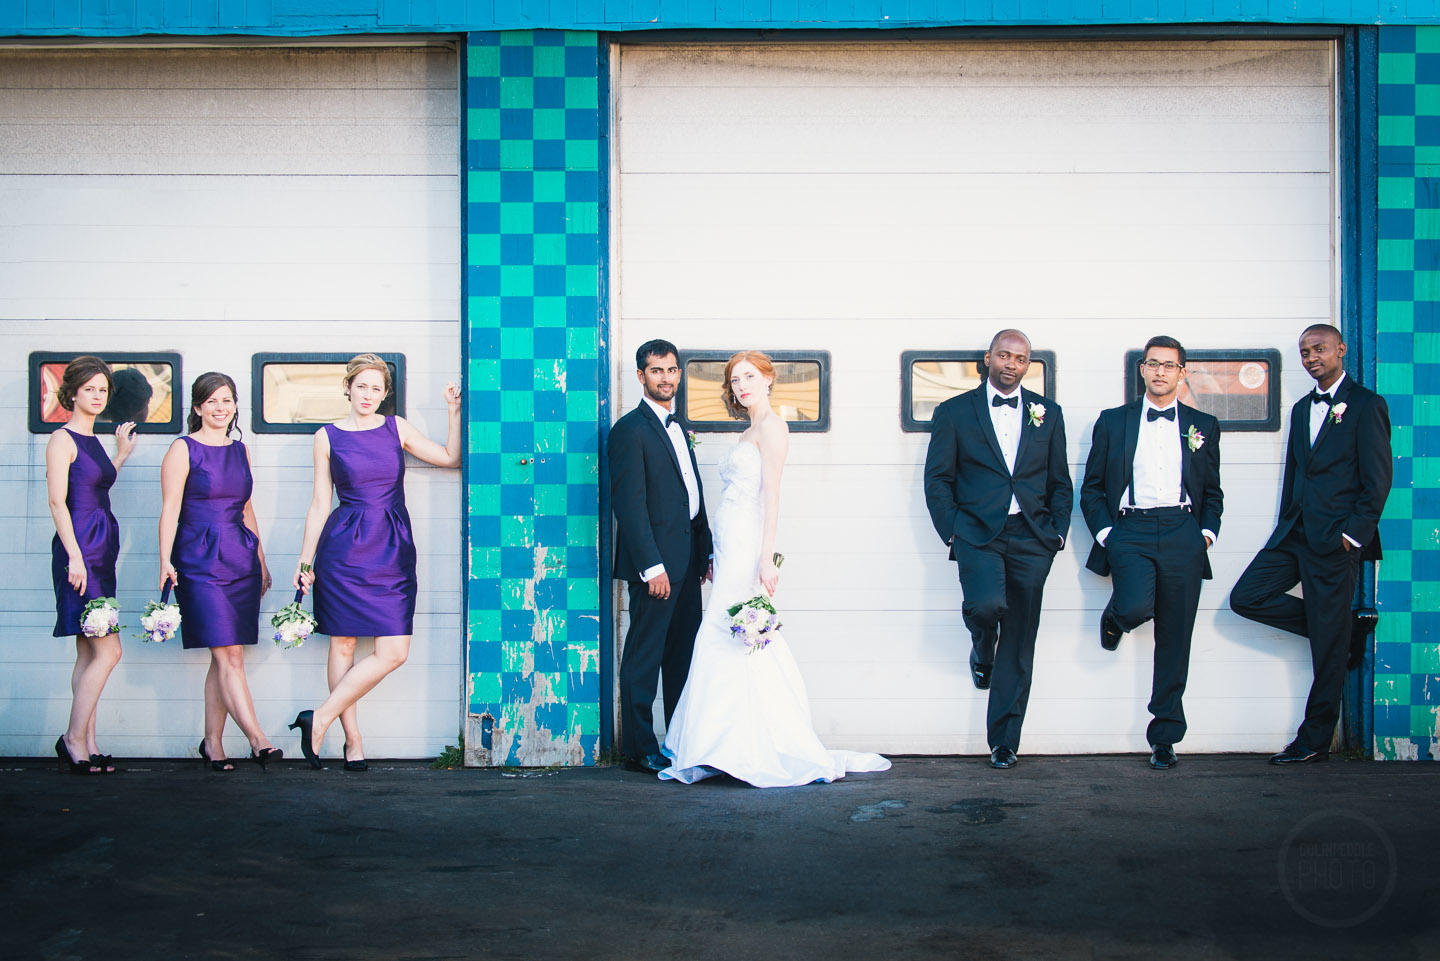 Against the colorful paint of a 1960s style garage door a bridal party poses.